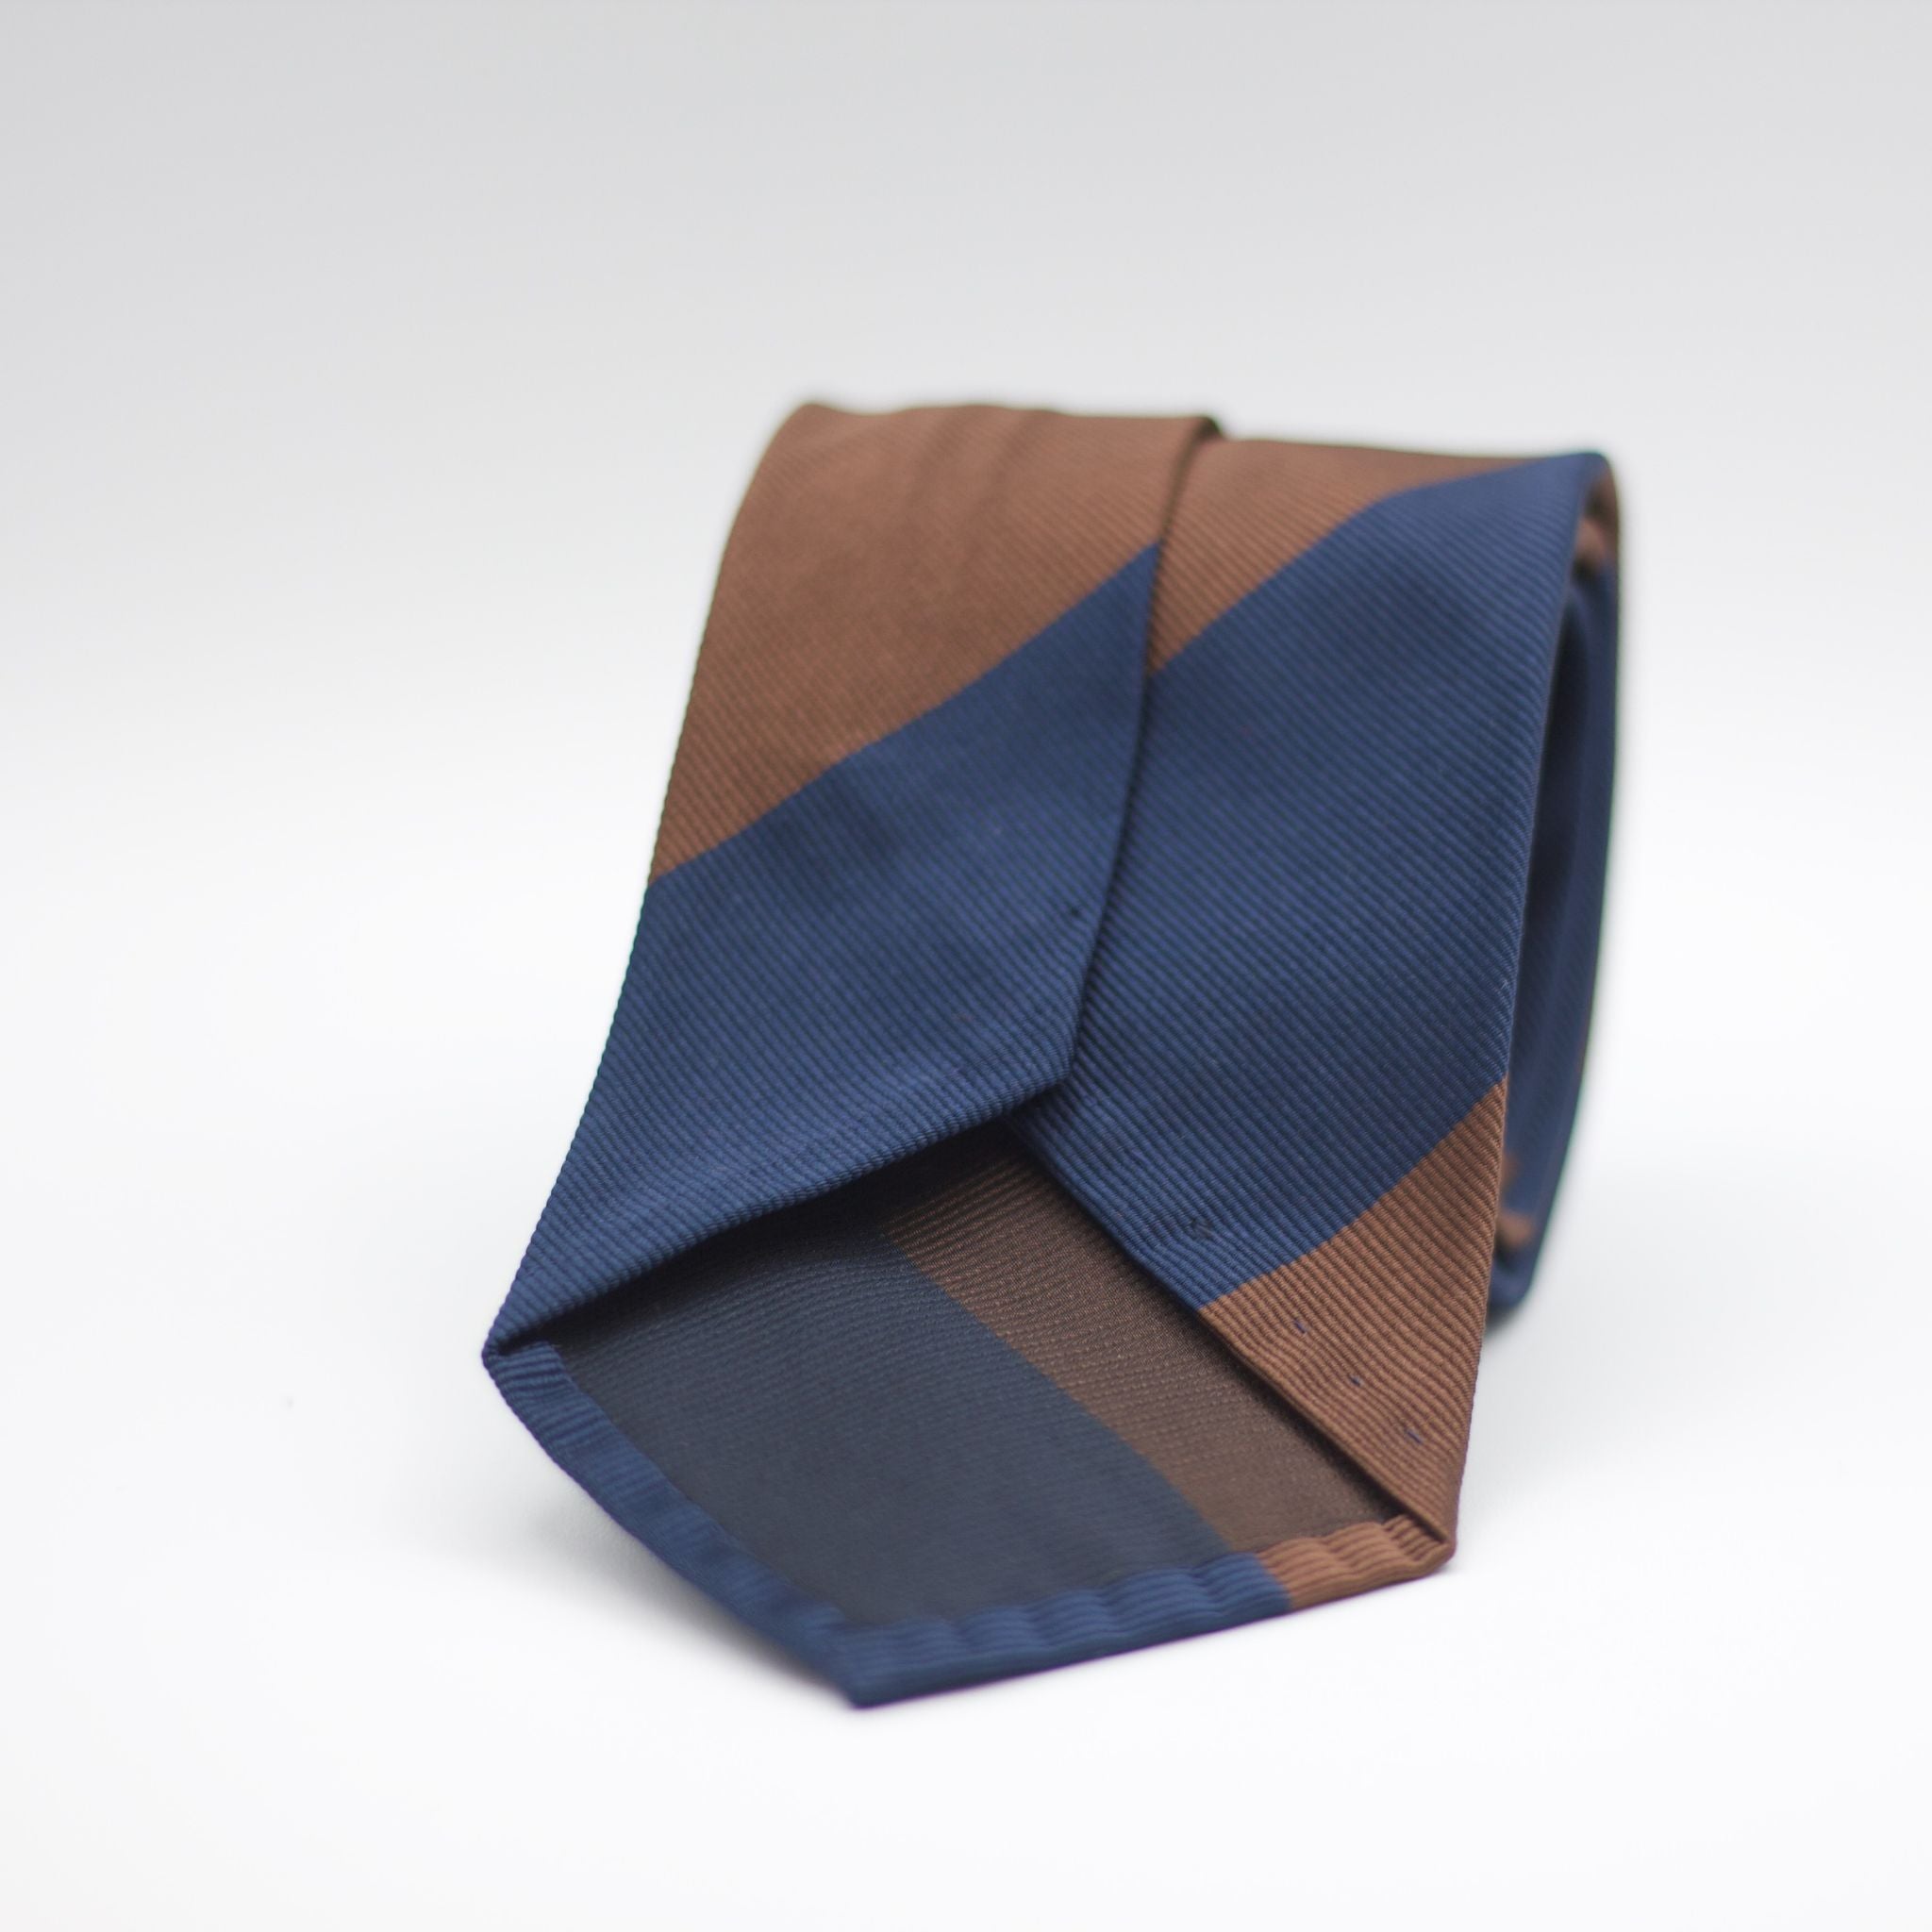 Cruciani & Bella 100% Woven Jacquard Silk Unlined Blue and Brown block stripes Unlined Tie Handmade in Italy 8 x 150 cm